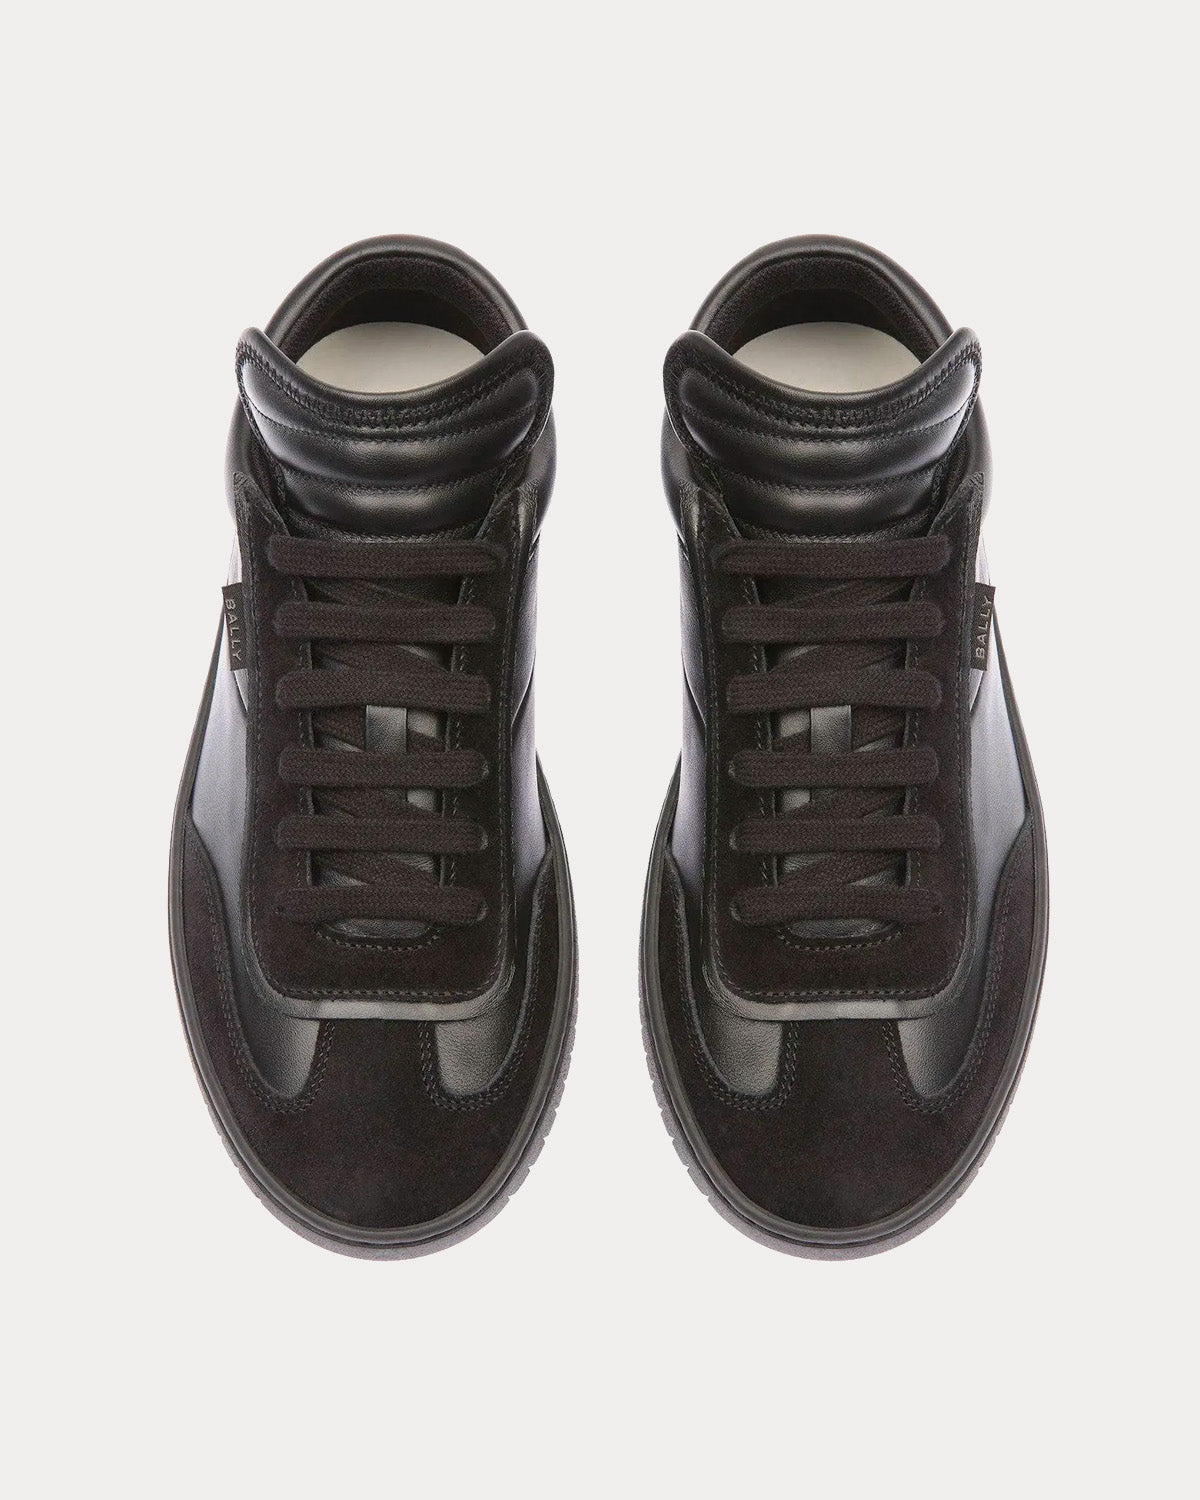 Bally - Player Leather & Suede Black Low Top Sneakers